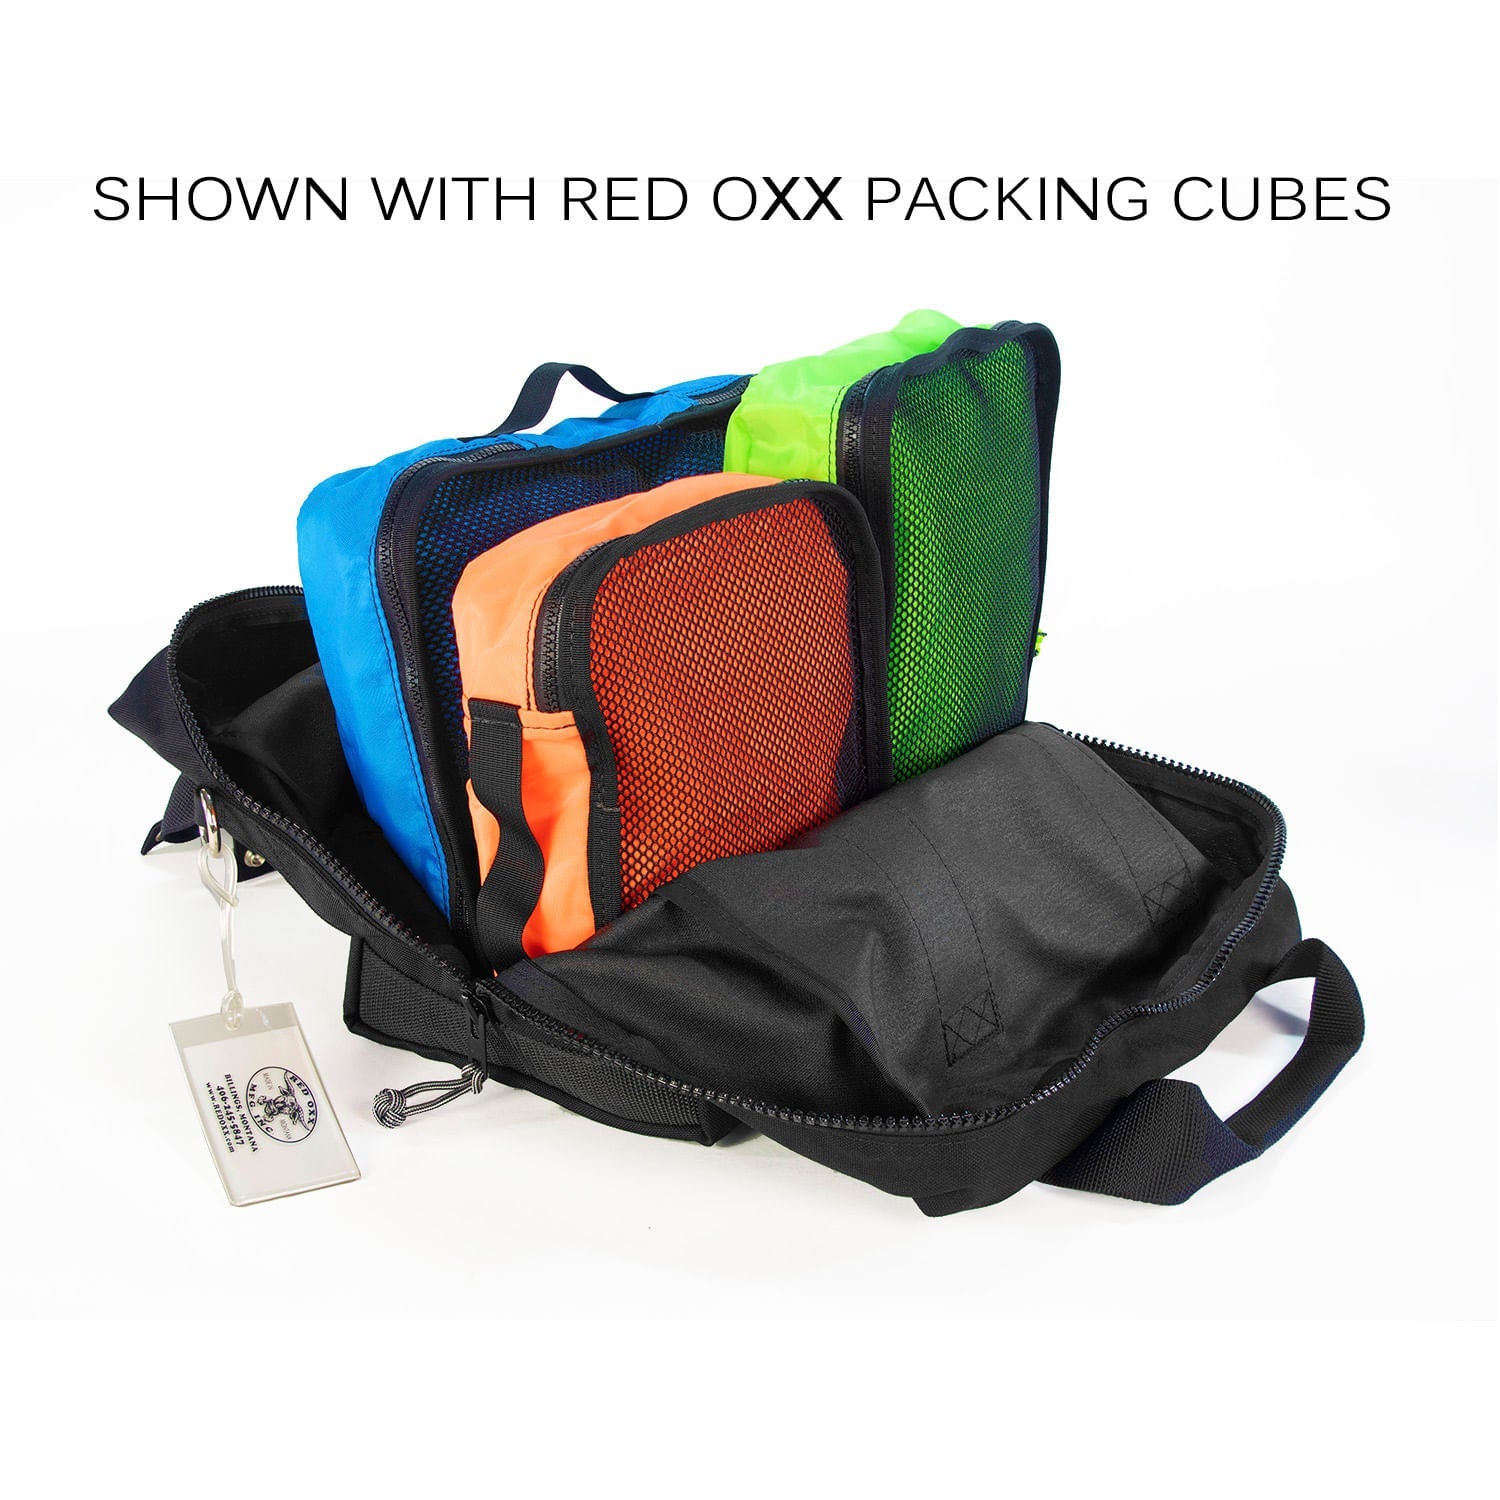 Red Oxx extra small aviator kit bag with Red Oxx packing cubes for size reference. 